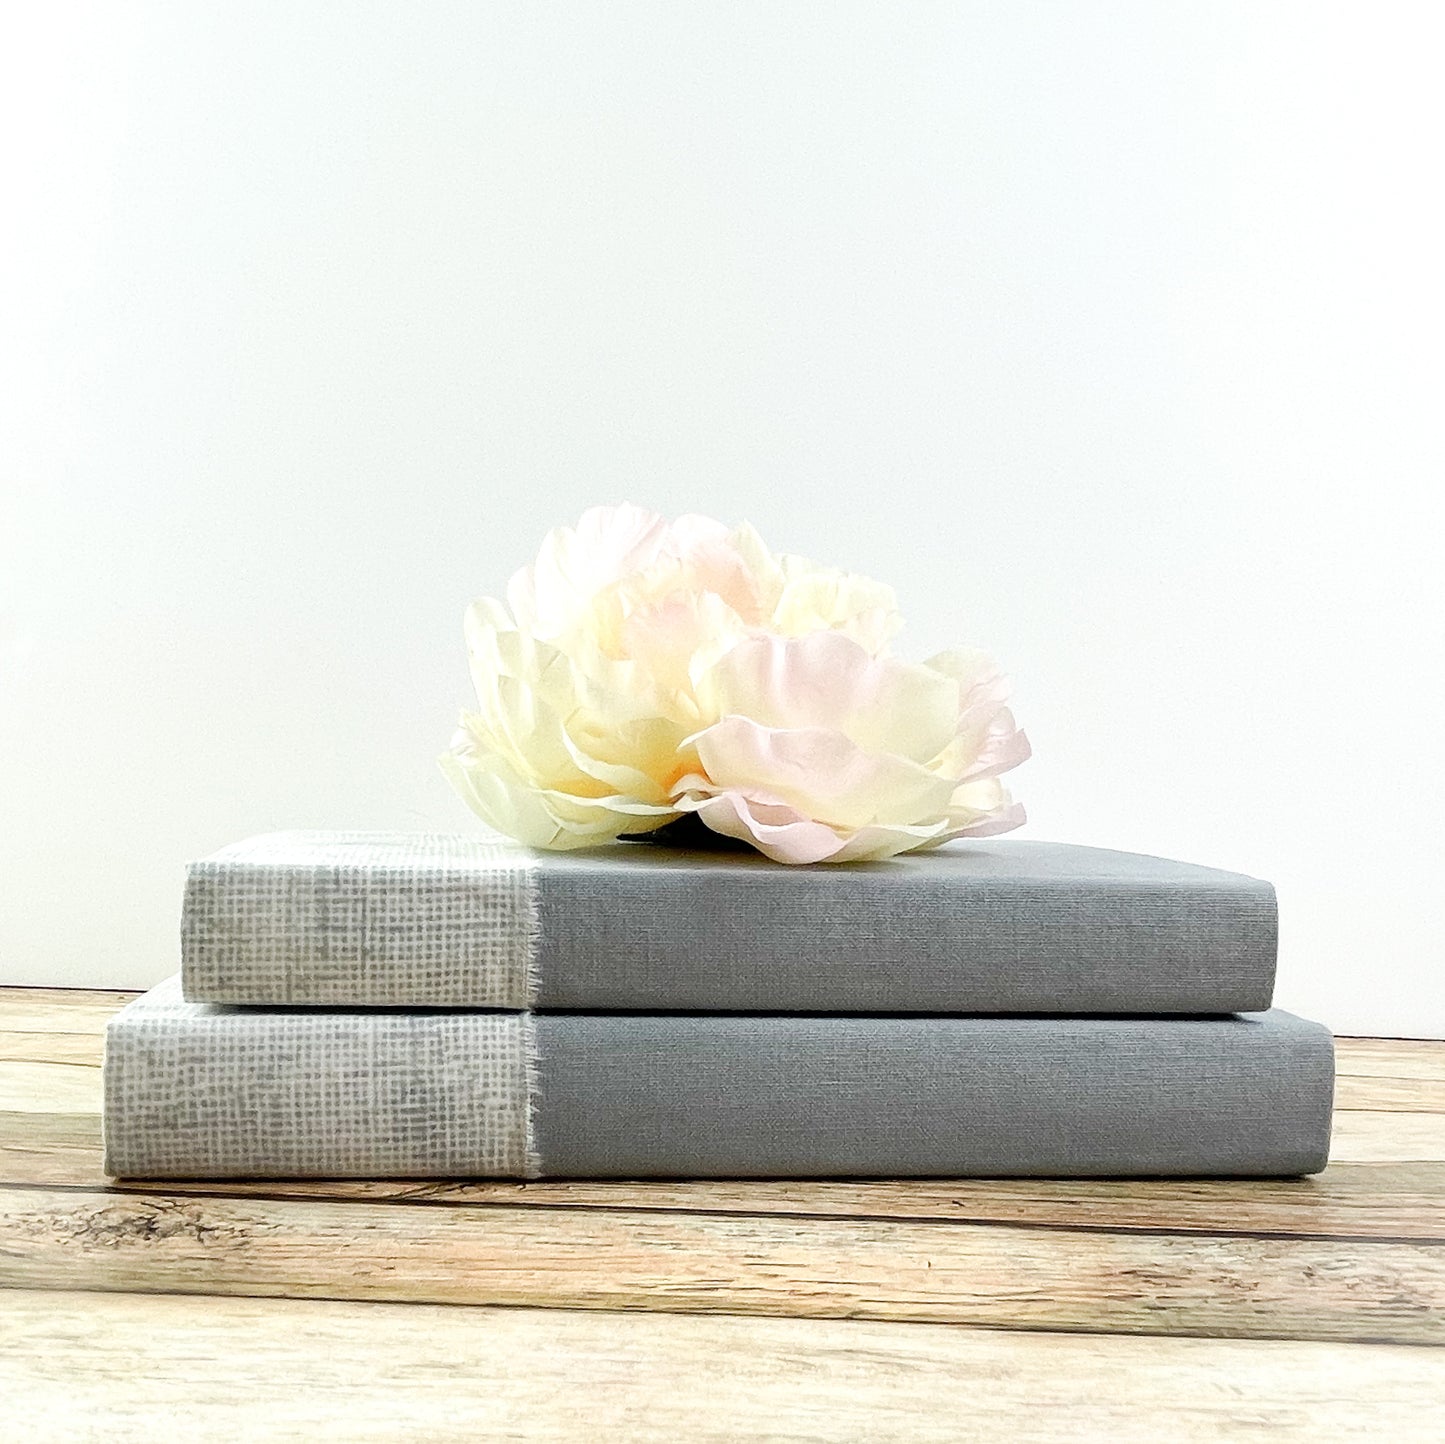 Neutral Book Sets for Home Decor